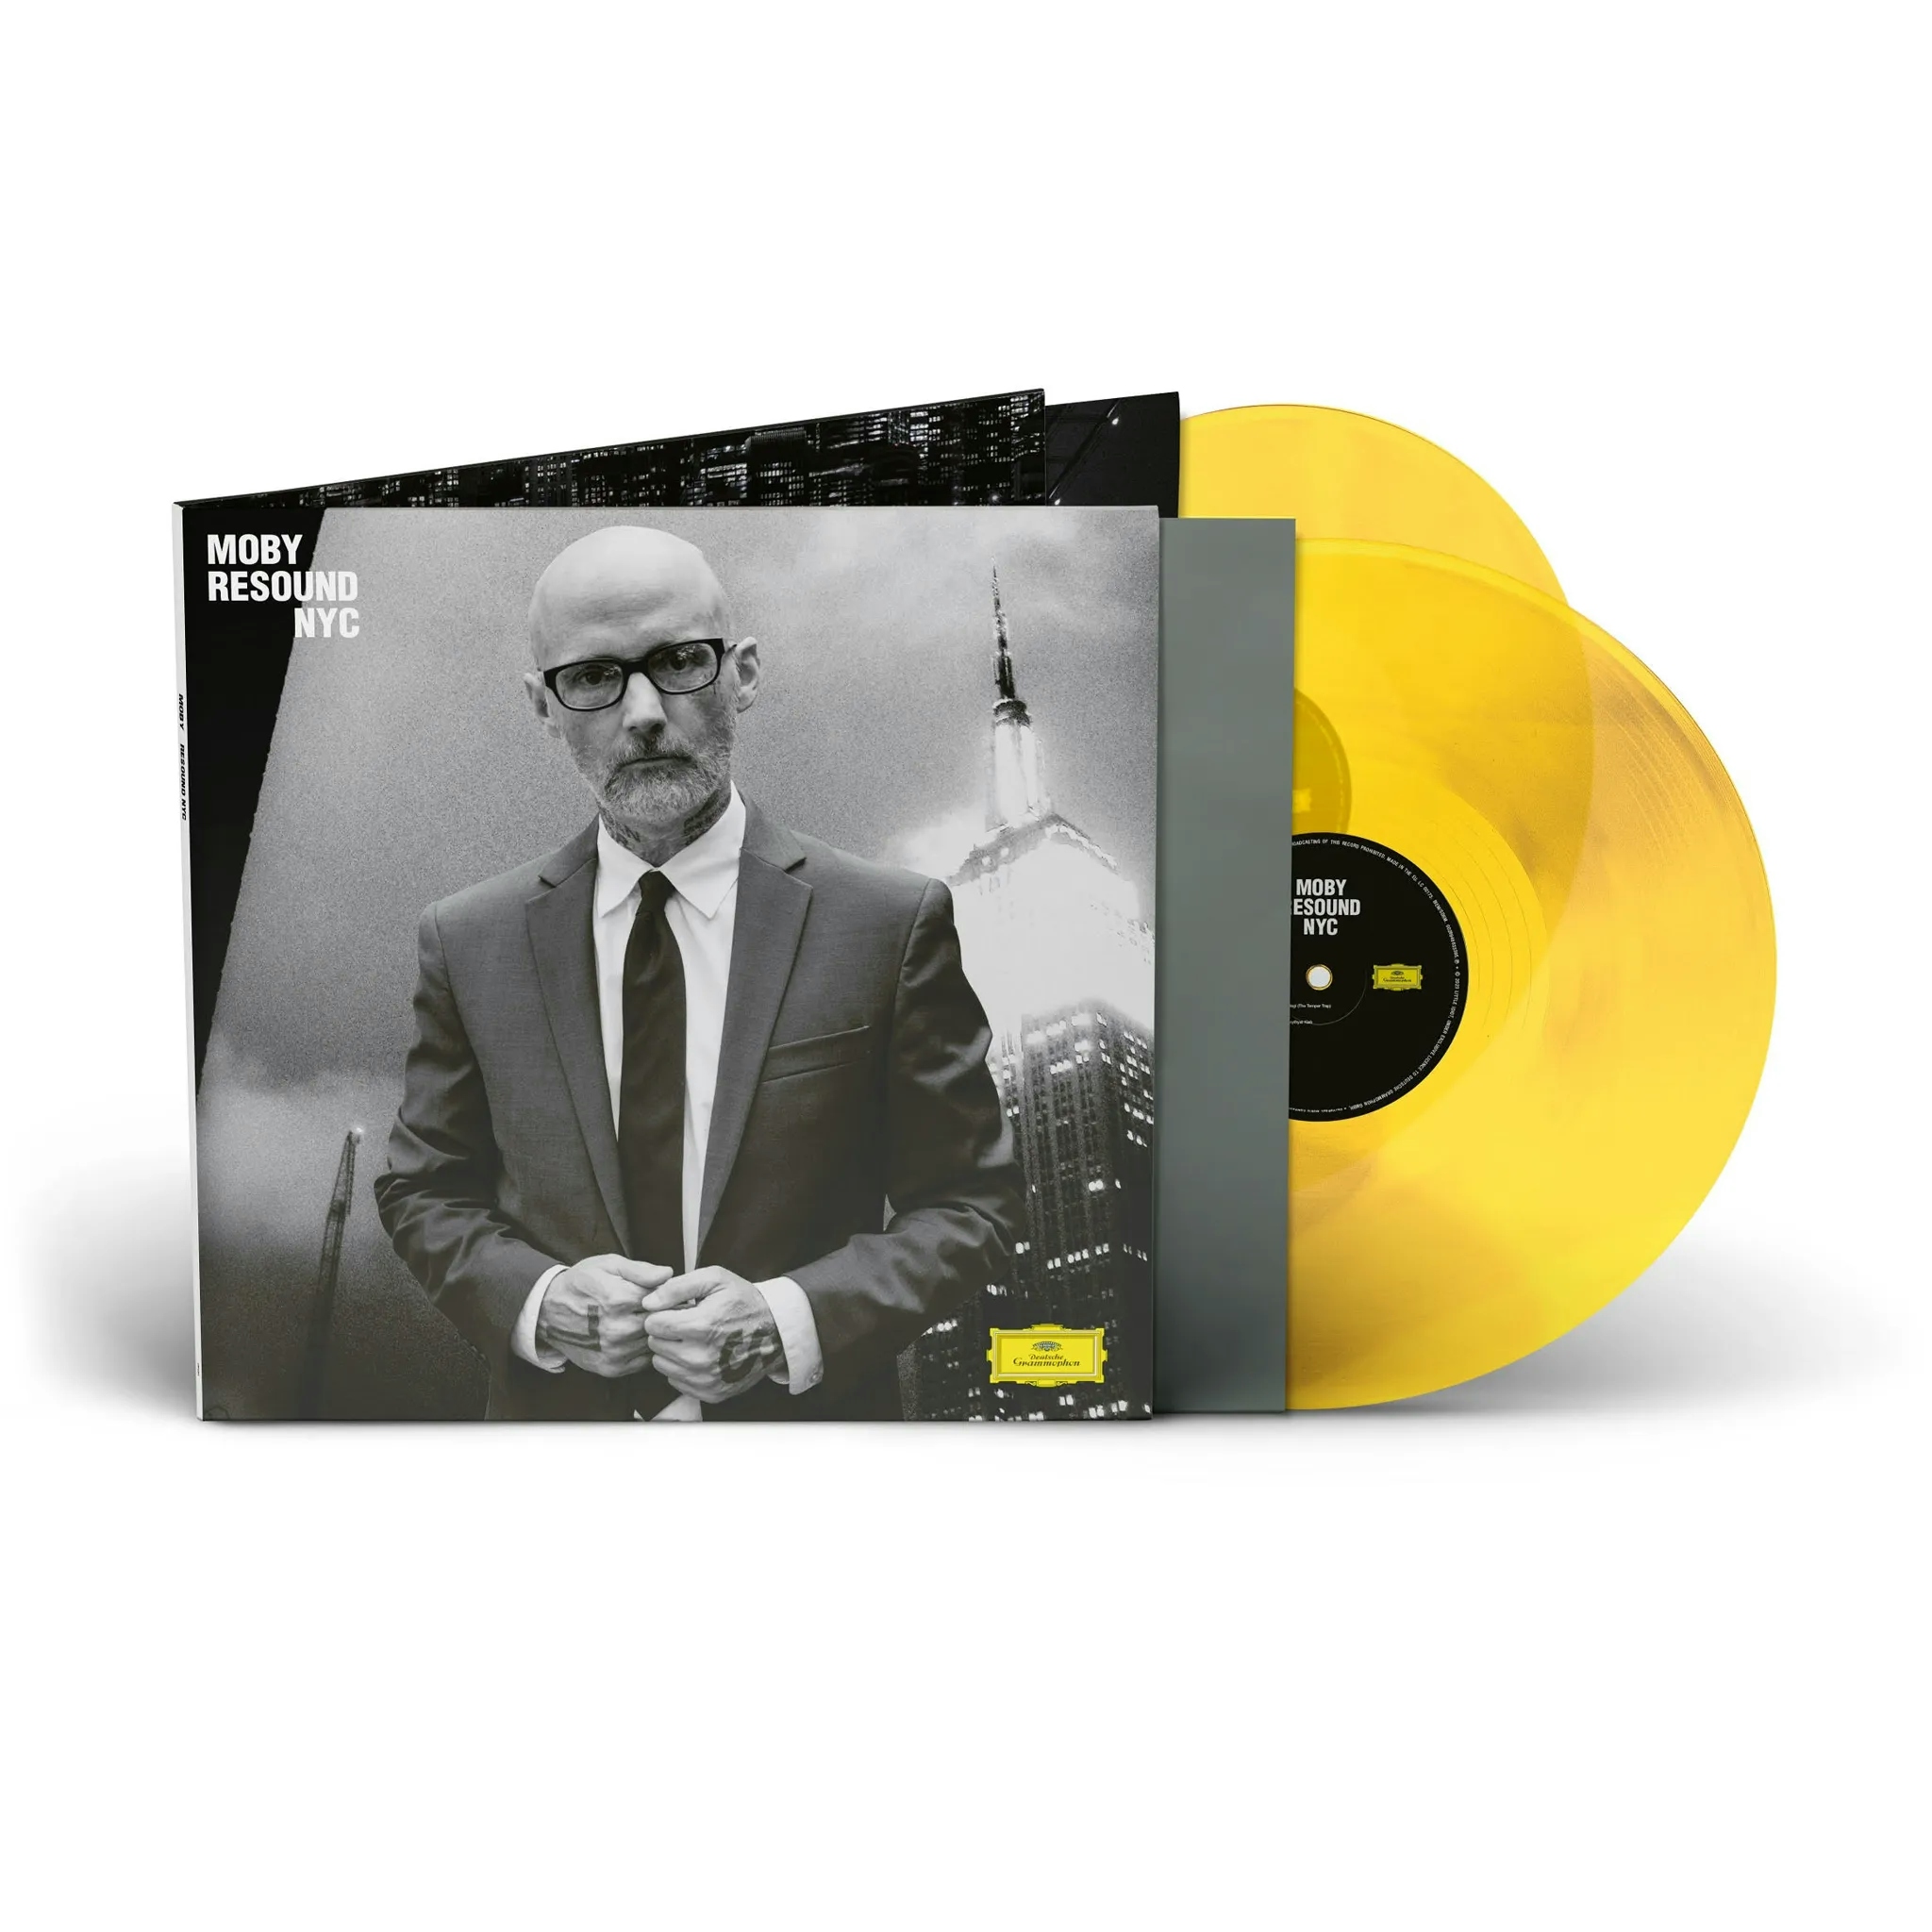 Album artwork for Resound NYC by Moby